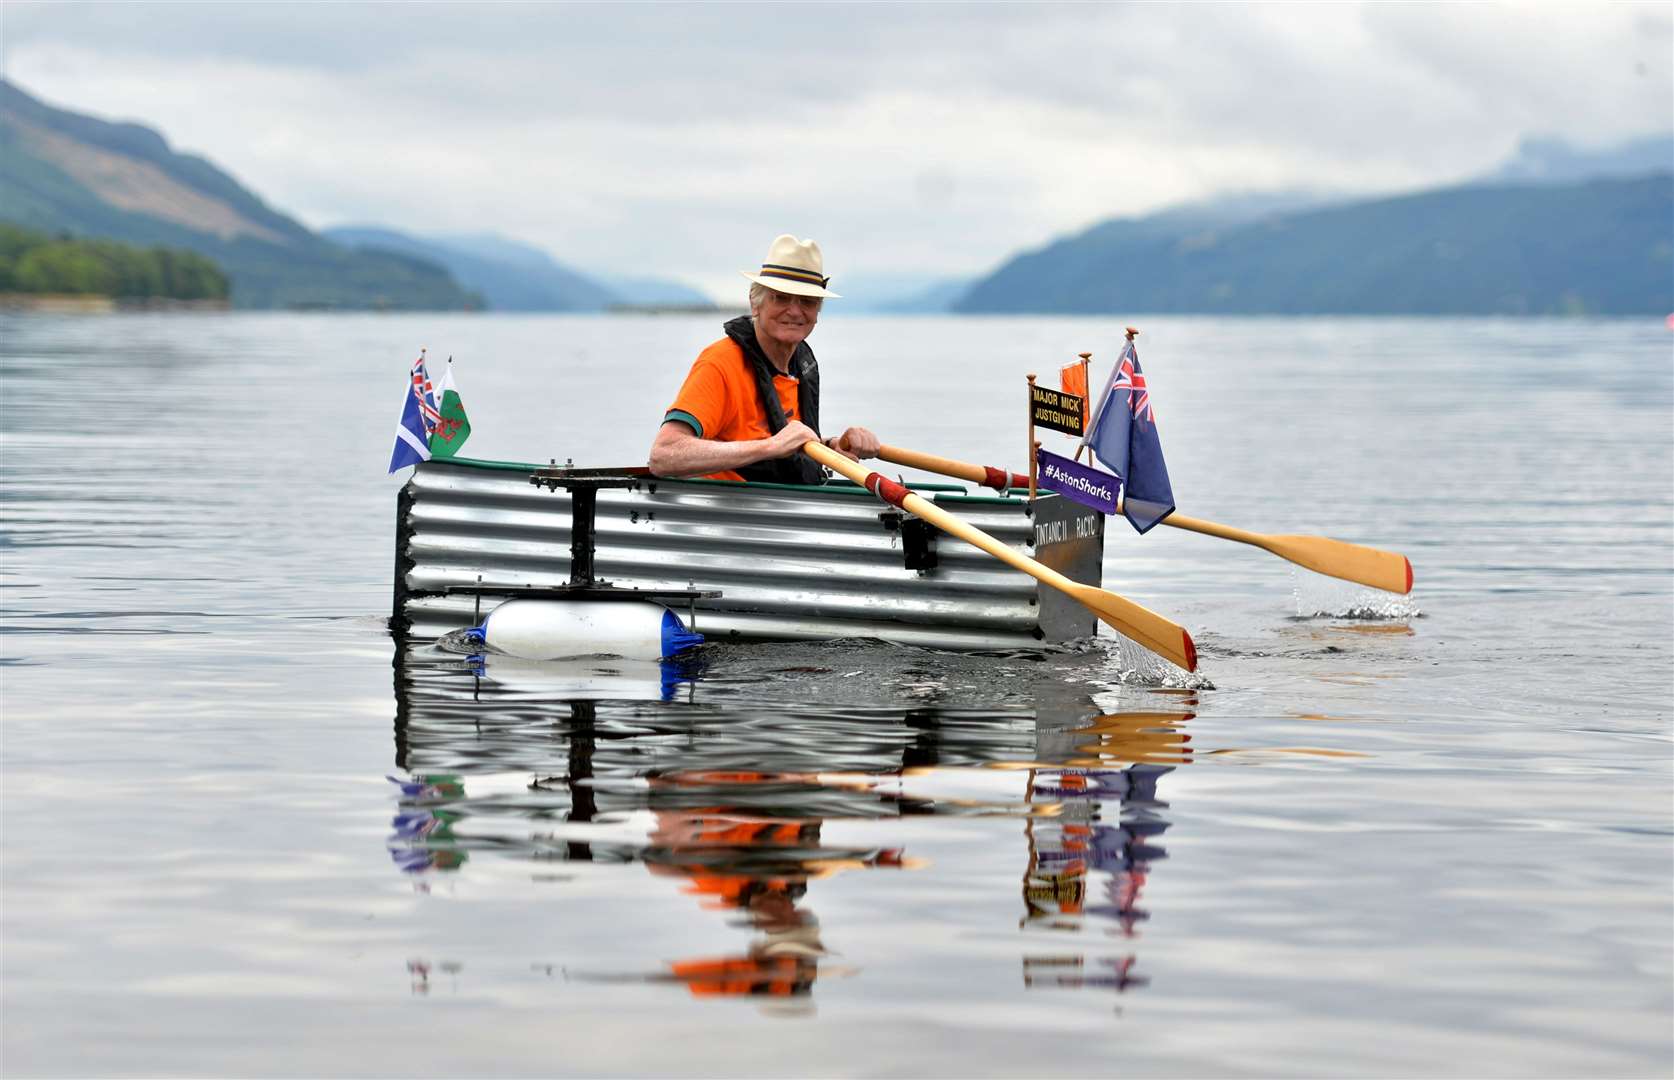 Major Mick rows out into Loch Ness in Tintanic II as part of his fundraising challenge for Alzheimer's Research UK.